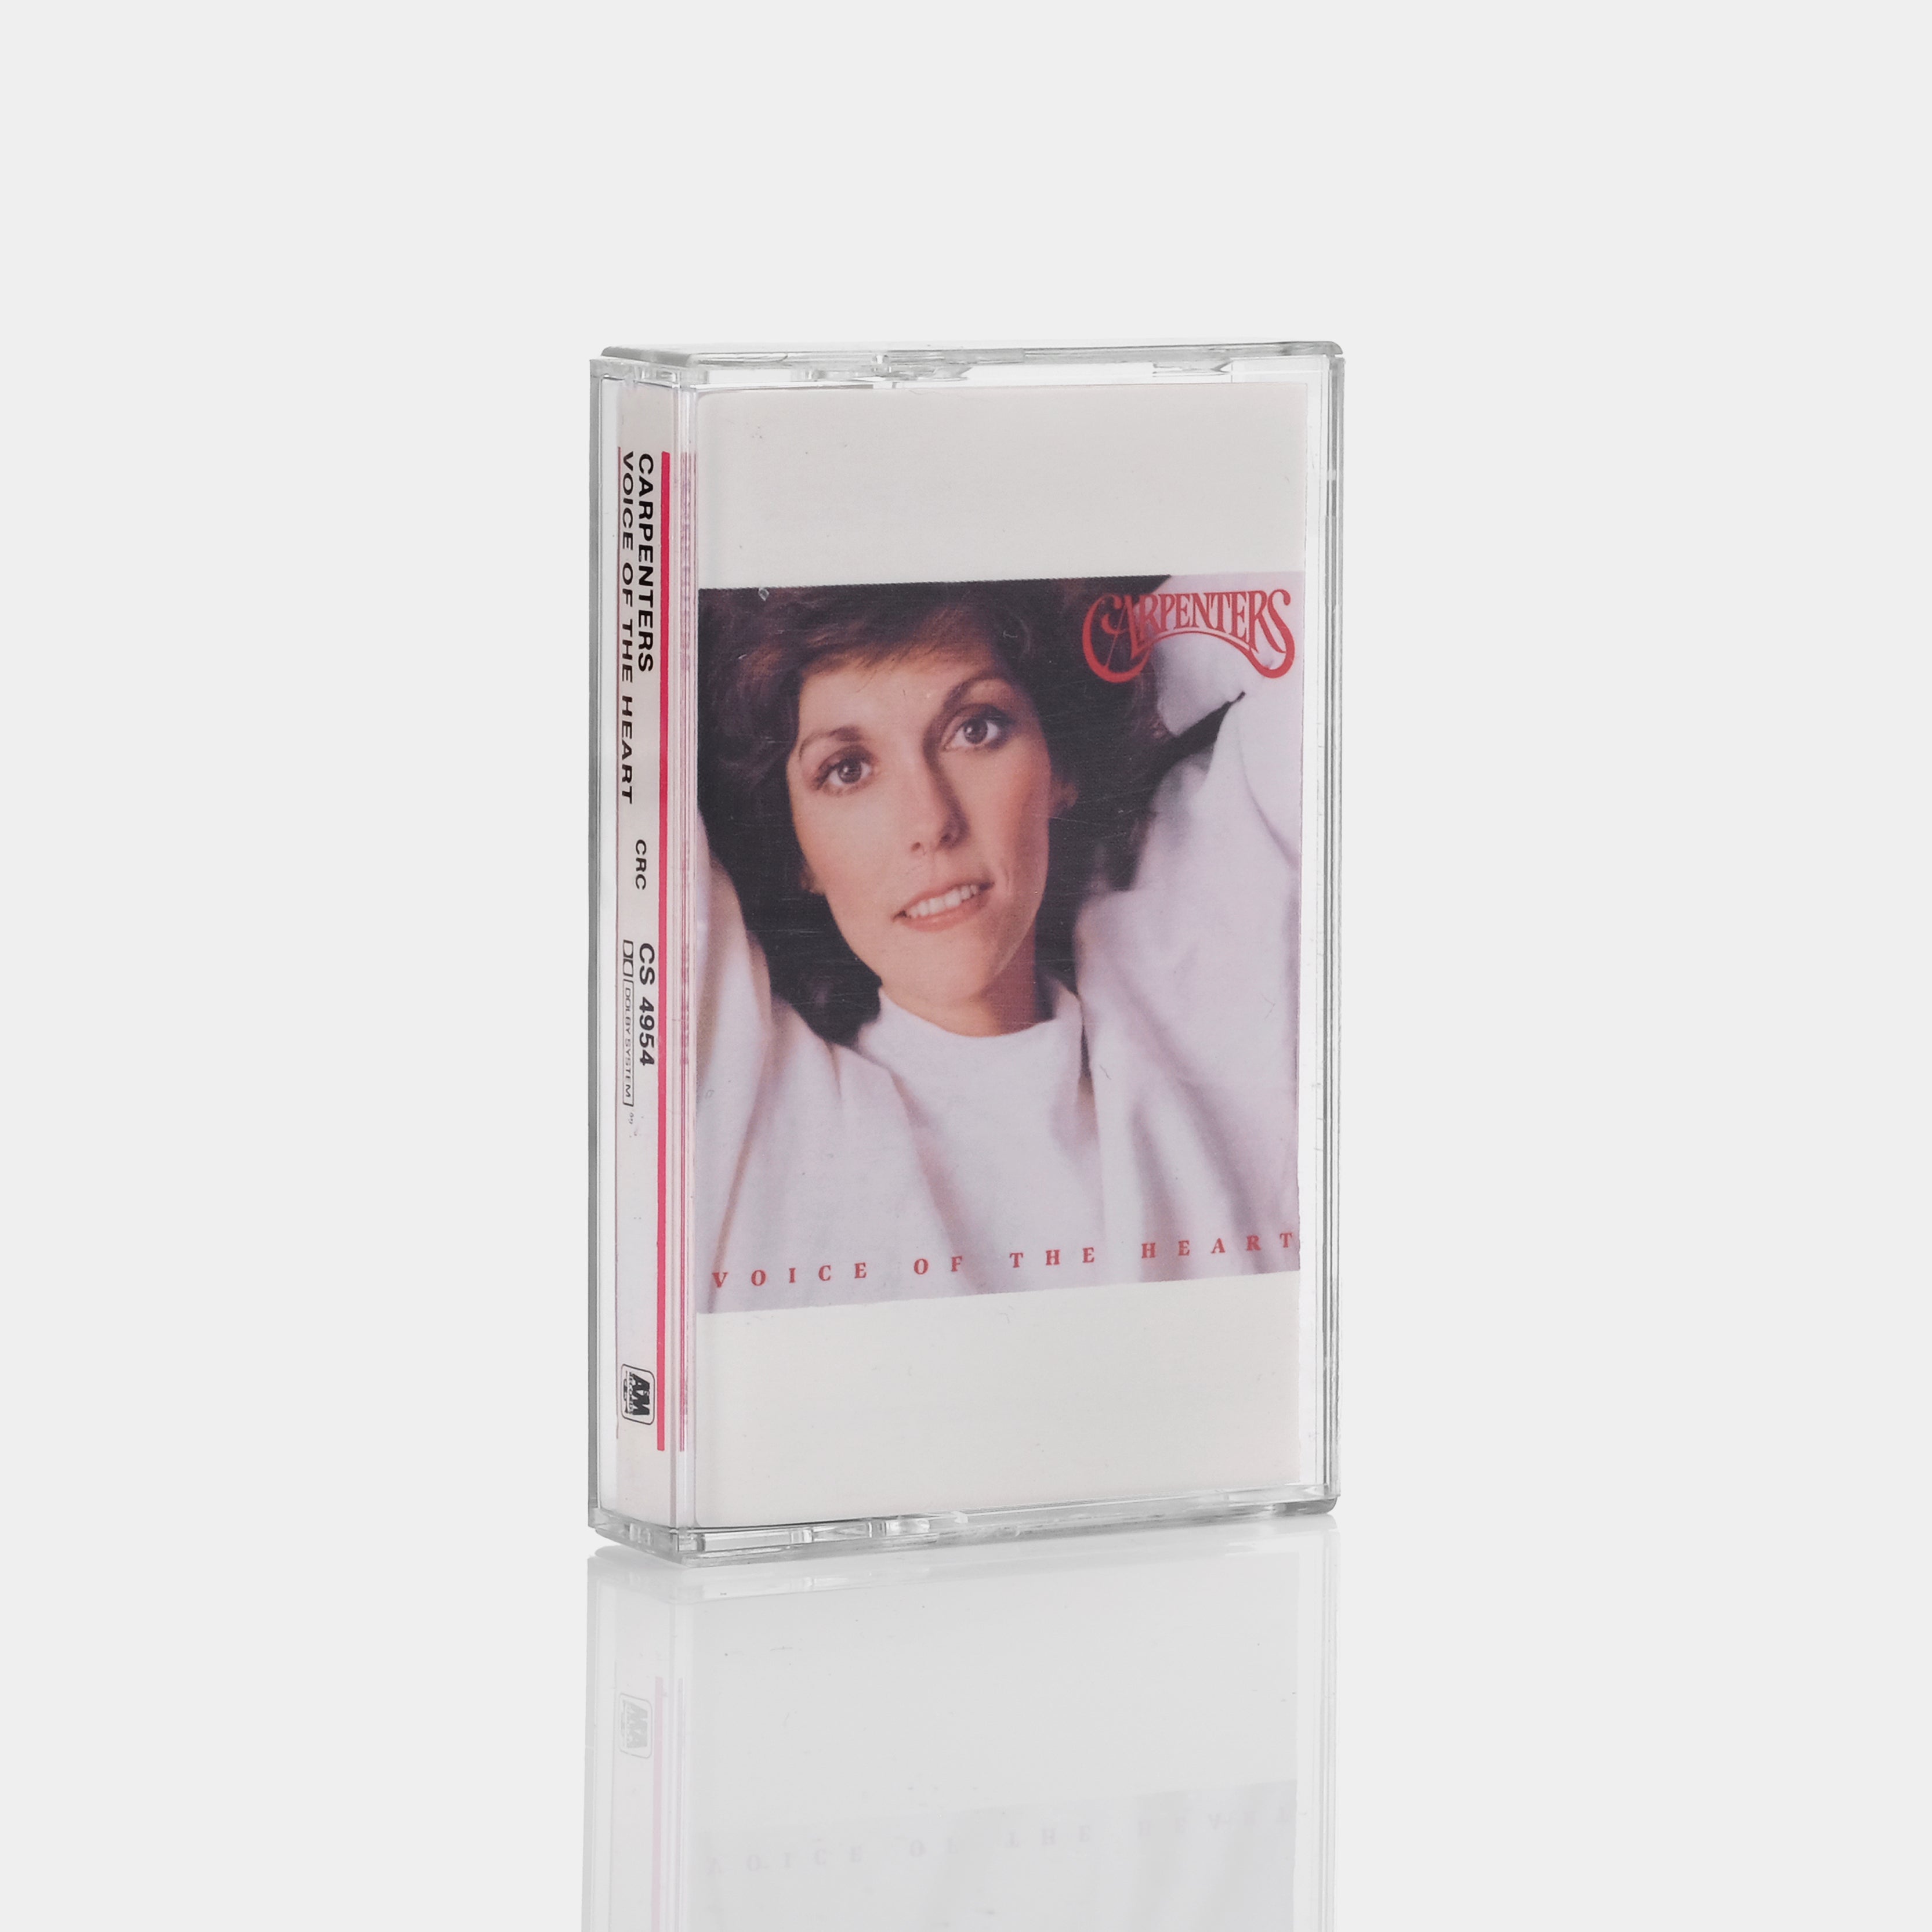 Carpenters - Voice Of The Heart Cassette Tape